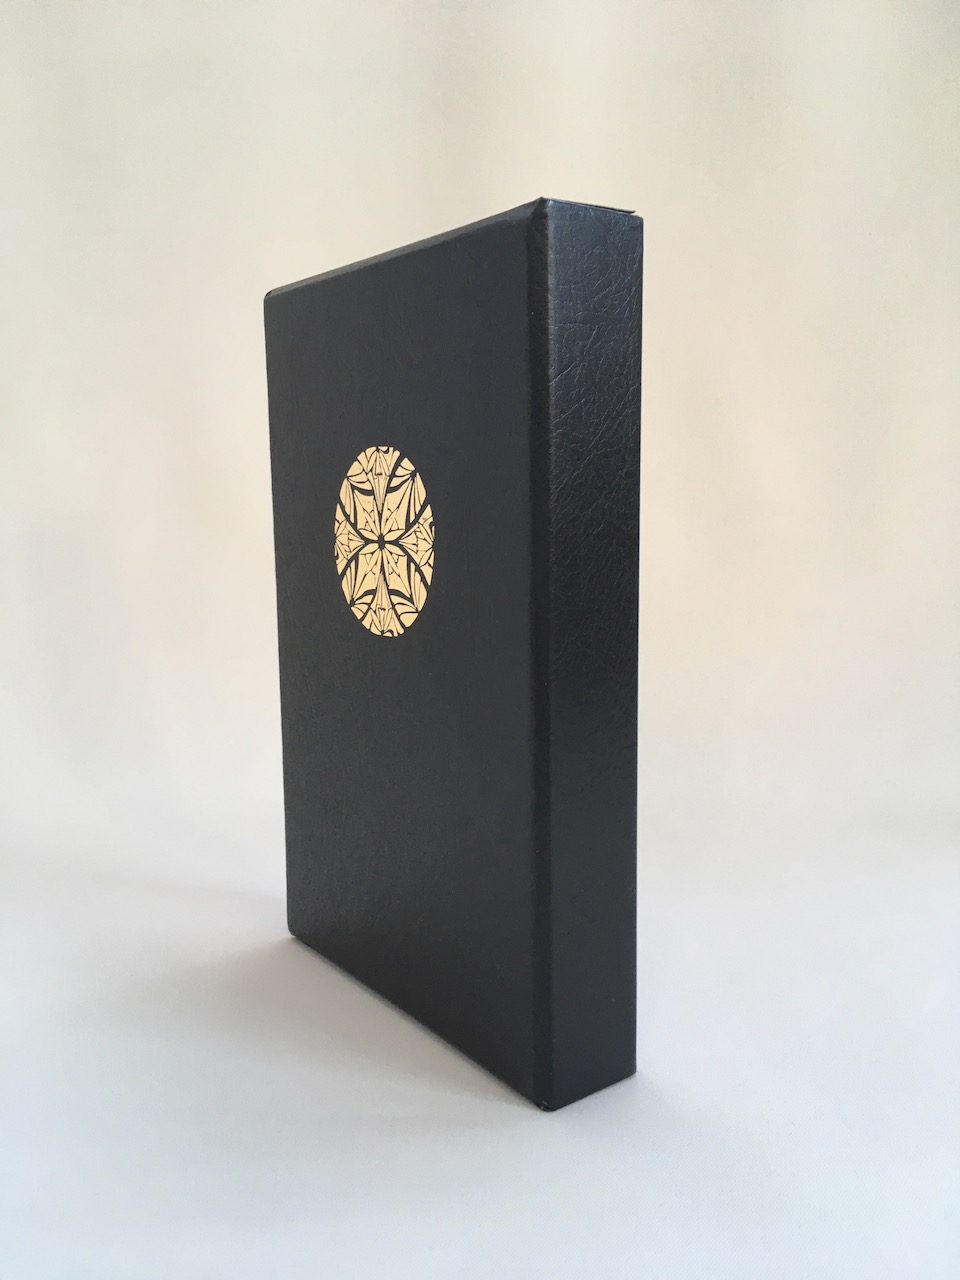 
Black Limited De Luxe edition of the Silmarillion 2002 4